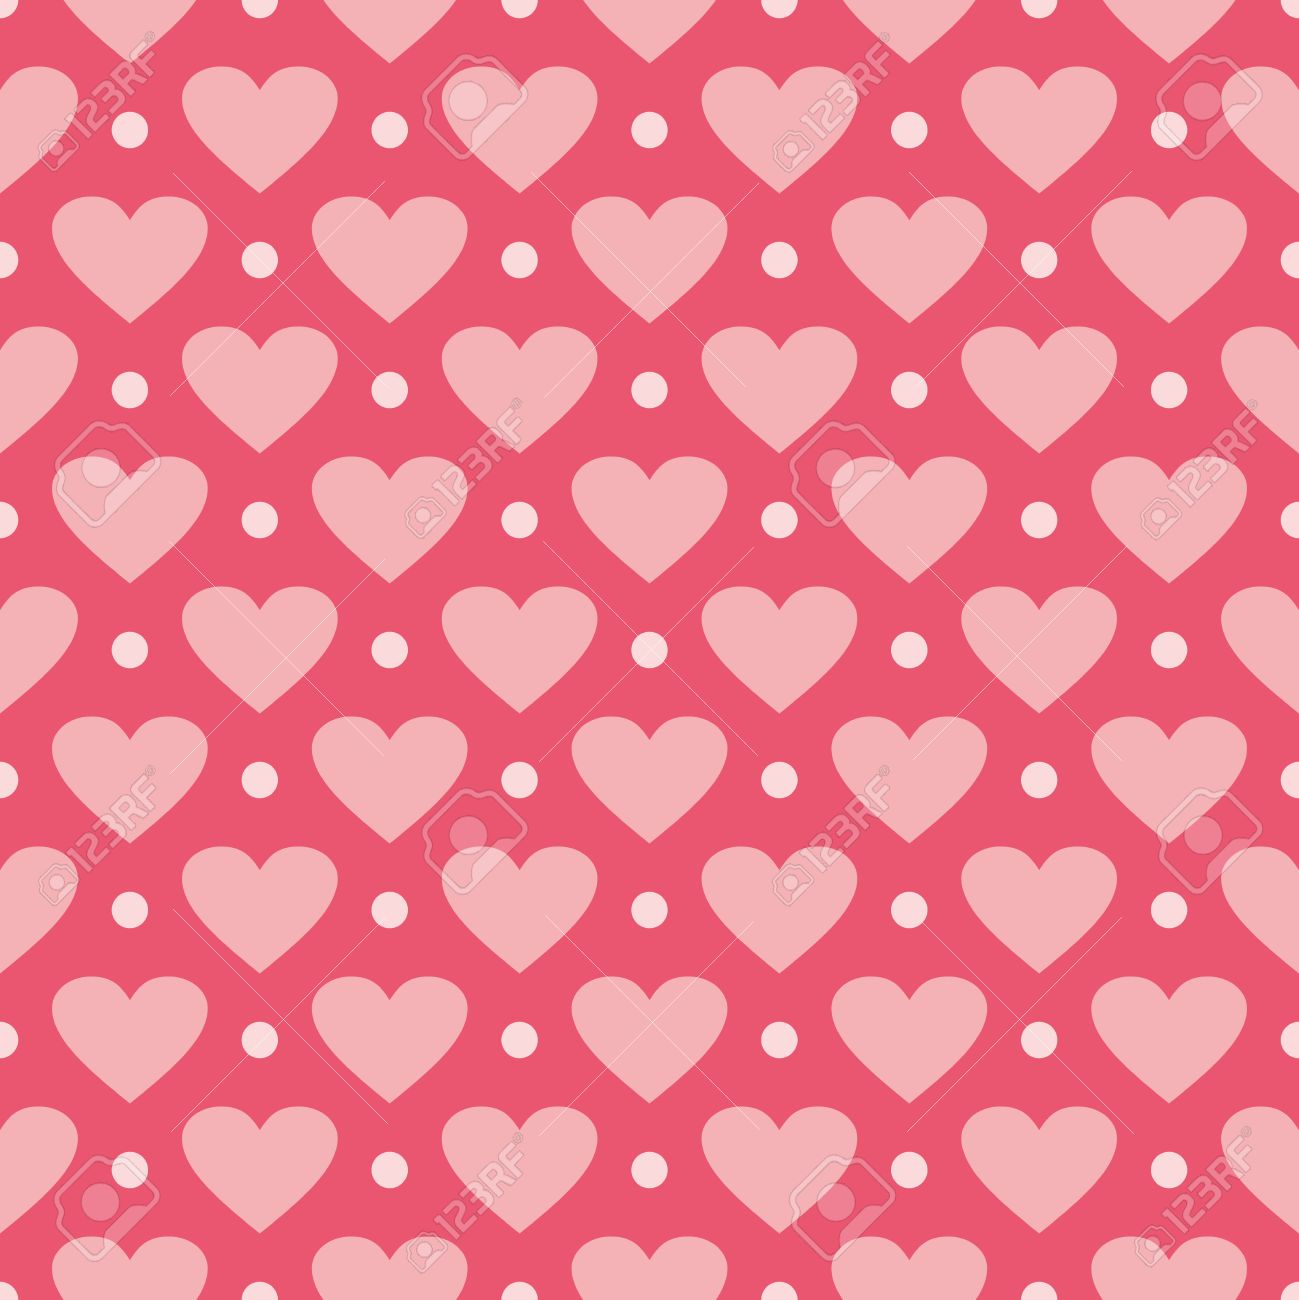 Pink Vector Background With Hearts And Polka Dots Cute Seamless